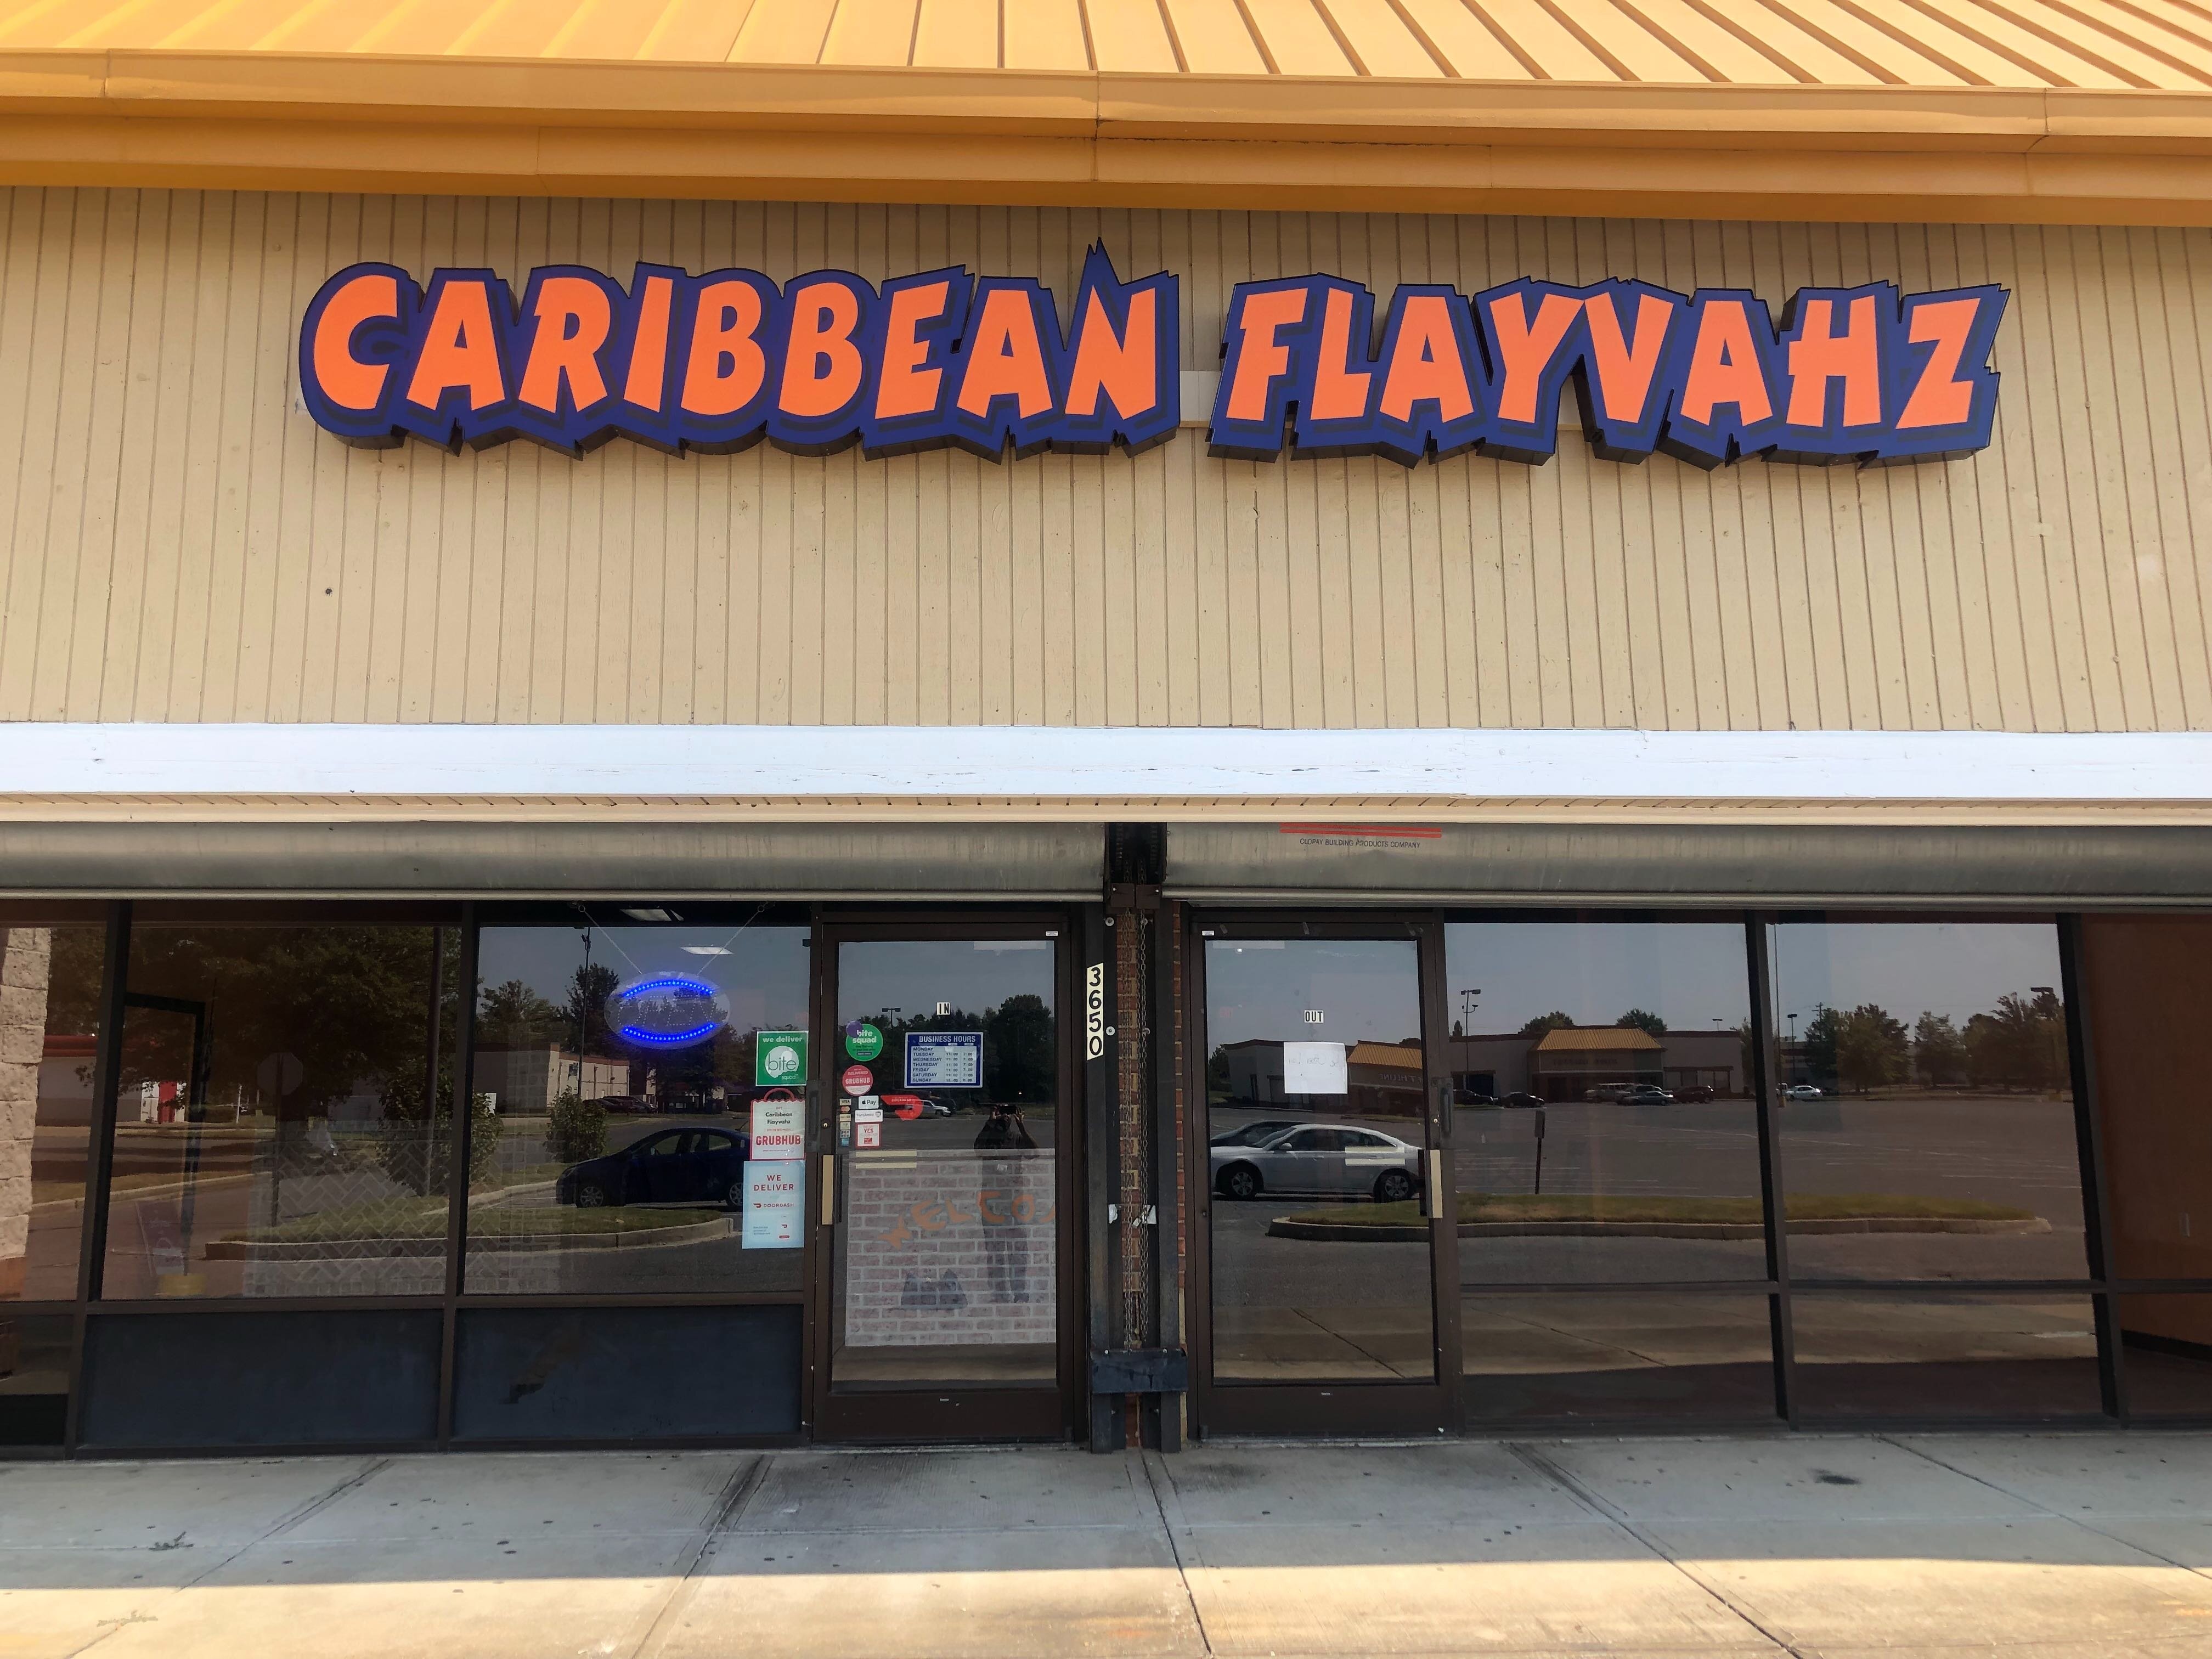 Caribbean Flayvahz is located at 3650 Ridgeway Road in Hickory Hill.